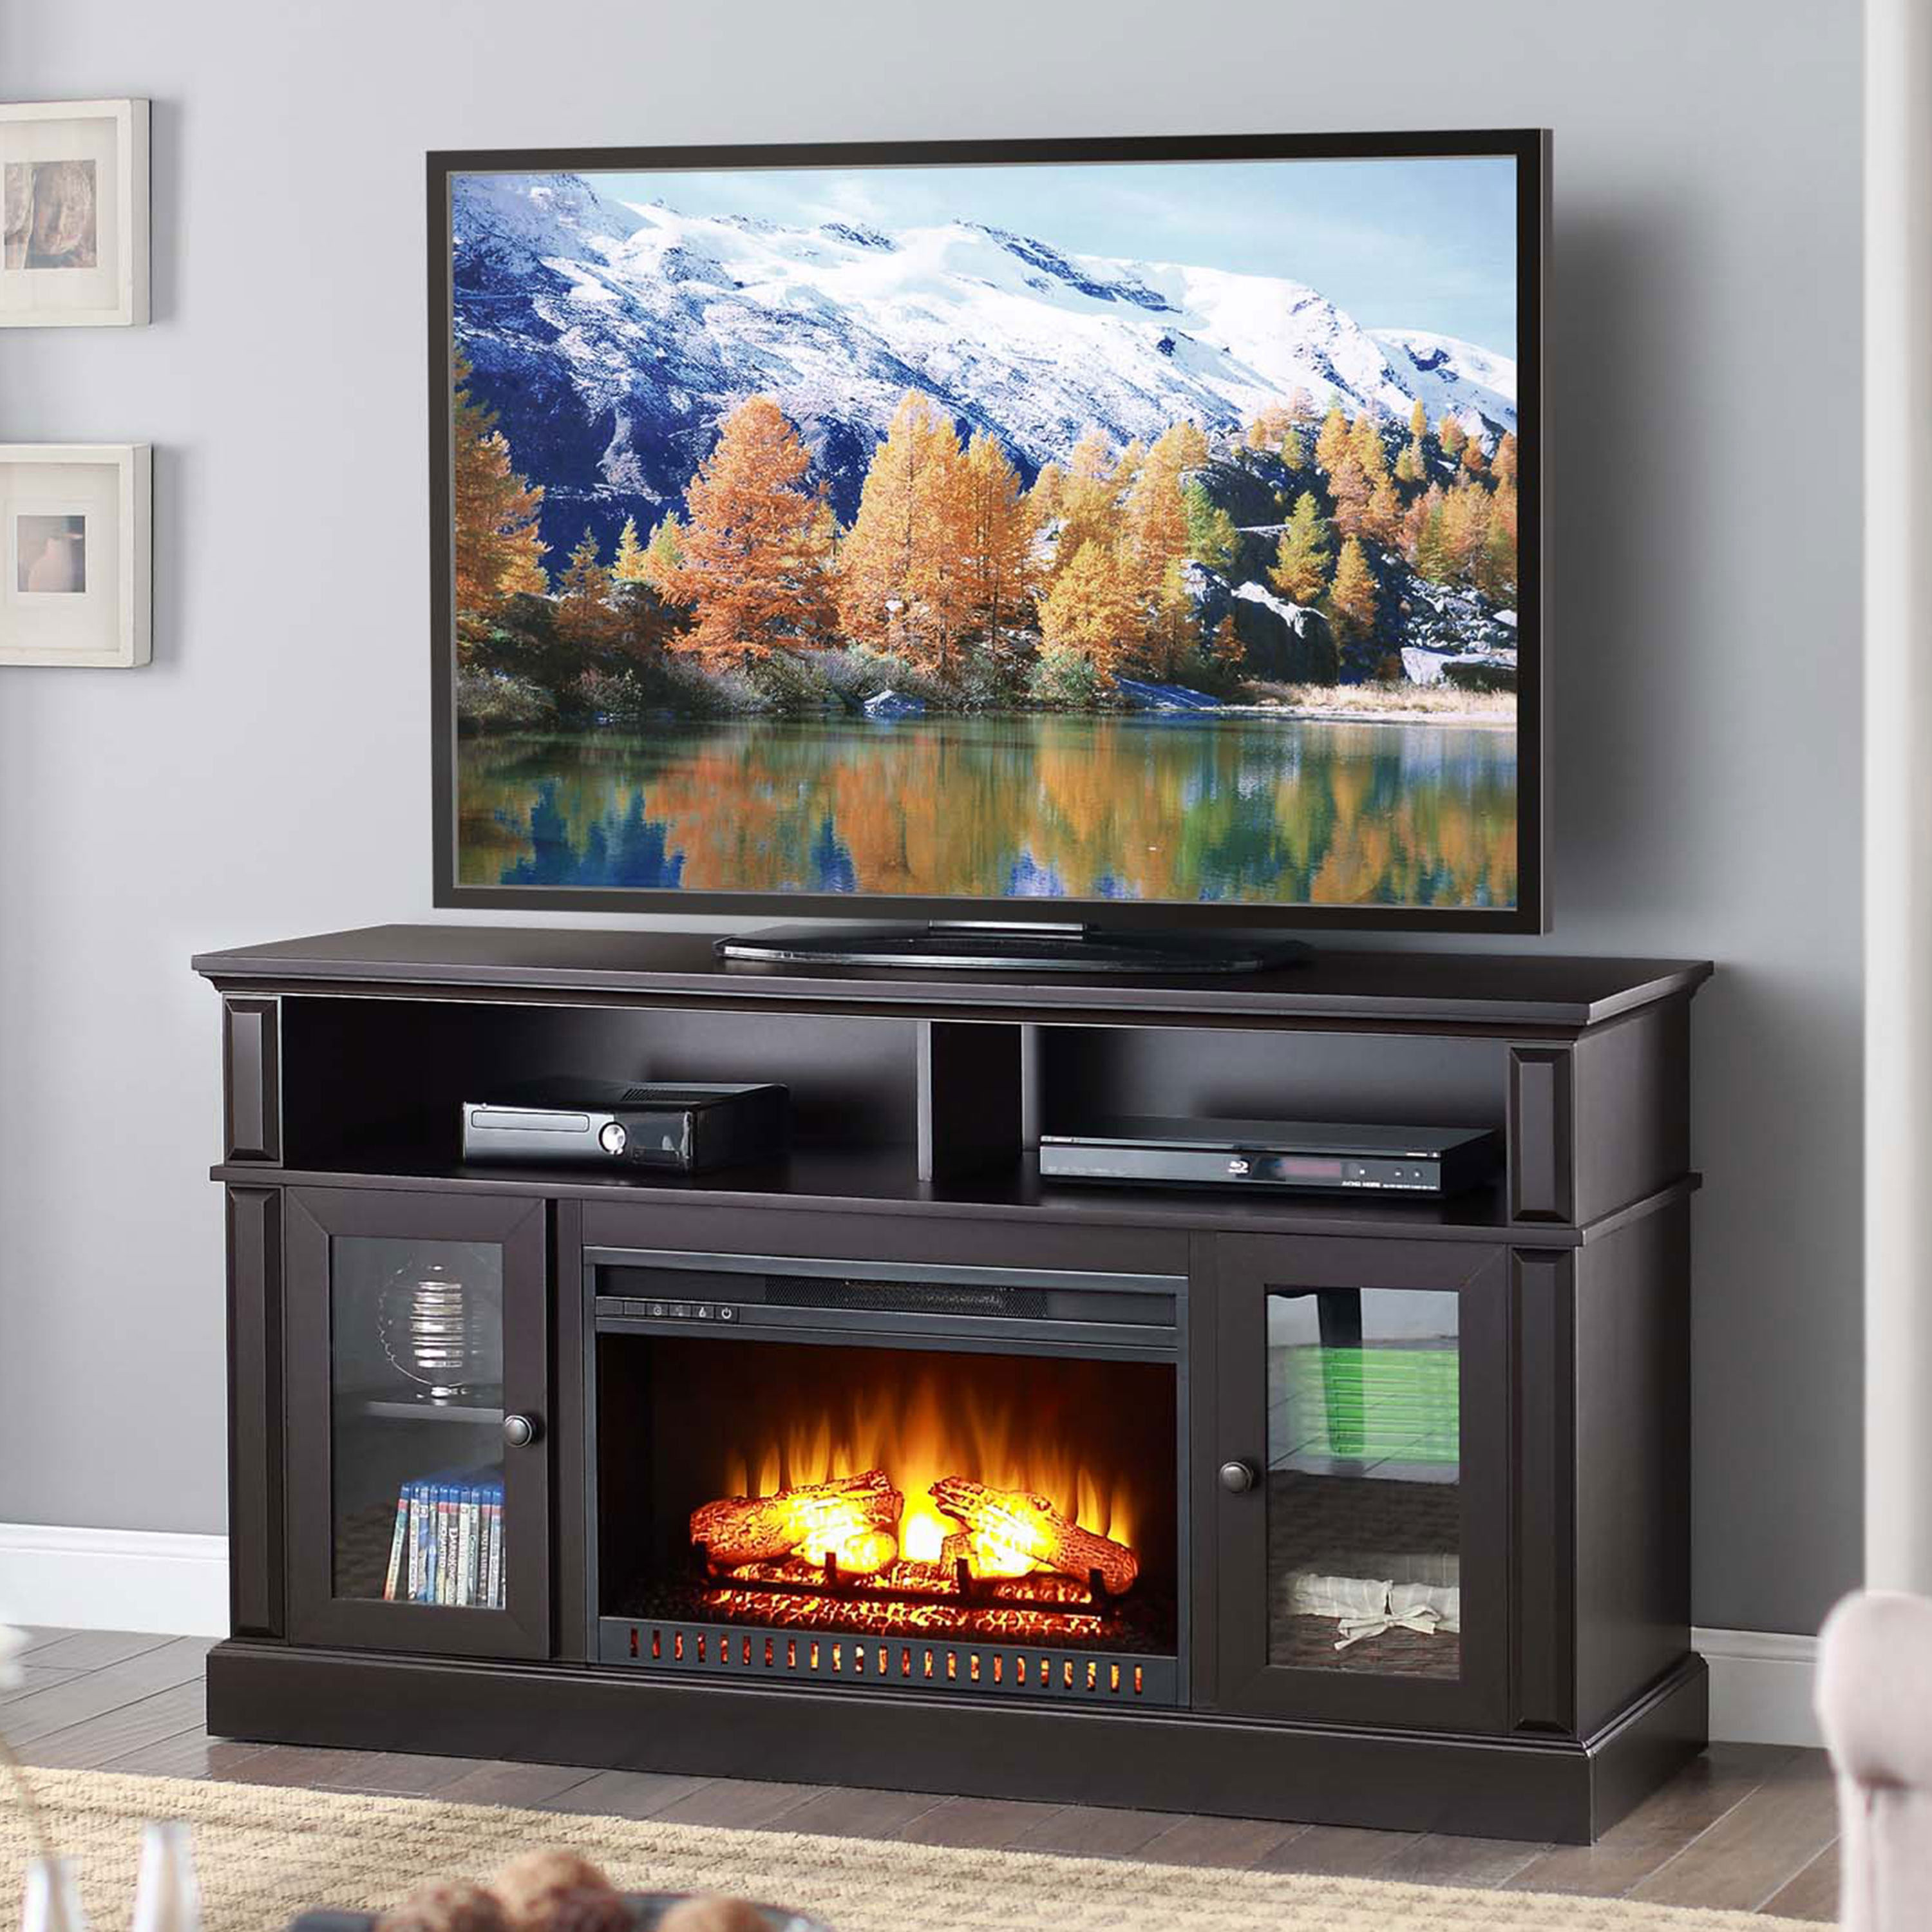 Value City Tv Stand with Fireplace Awesome Whalen Barston Media Fireplace for Tv S Up to 70 Multiple